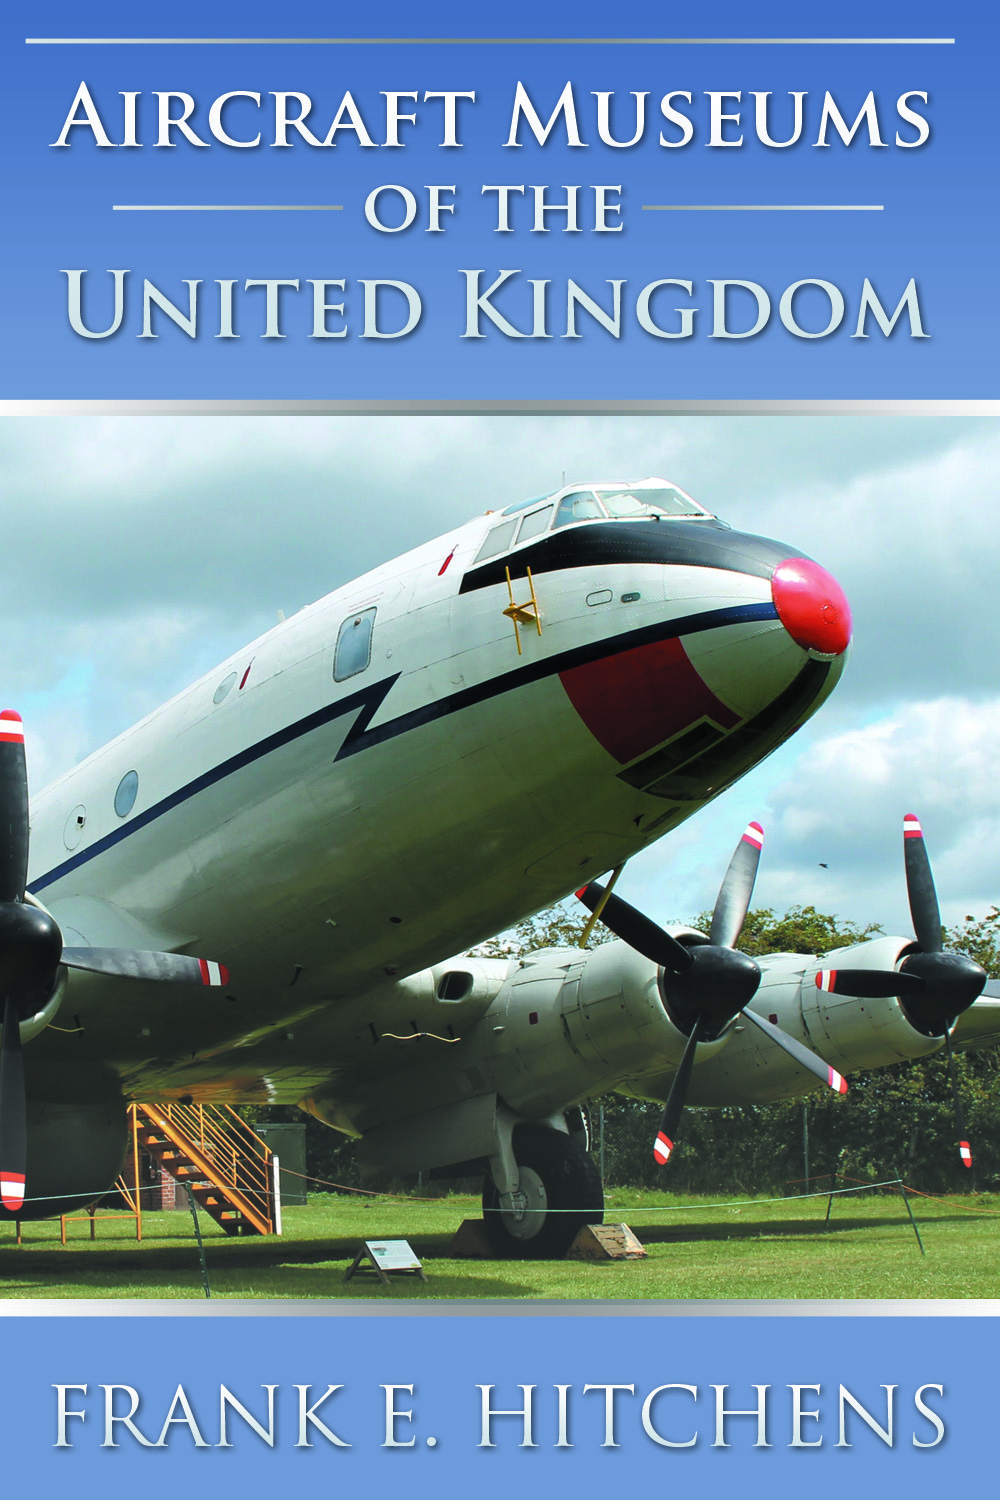 Hitchens, Frank E. - Aircraft Museums of the United Kingdom, ebook